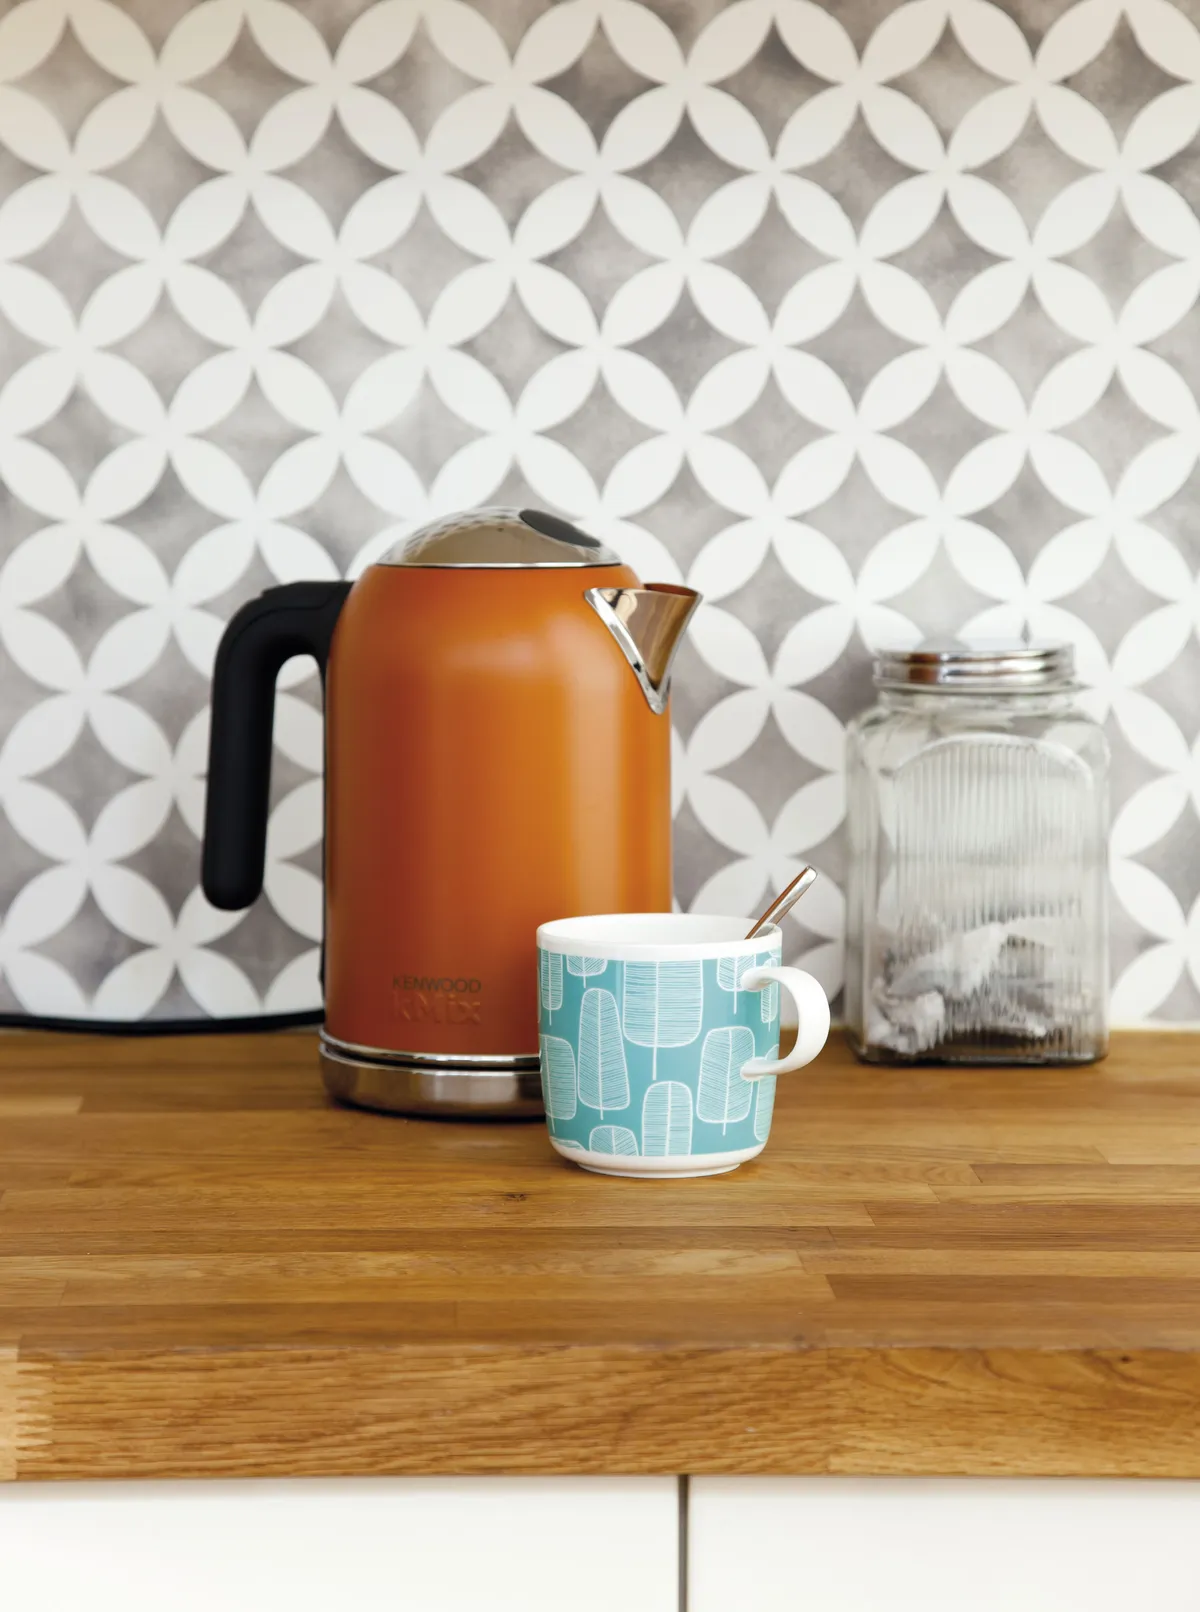 It cost just £42 to stencil a pattern that looks like tiles. Make sure you use wipeable kitchen paint so the walls are protected, and the design will last